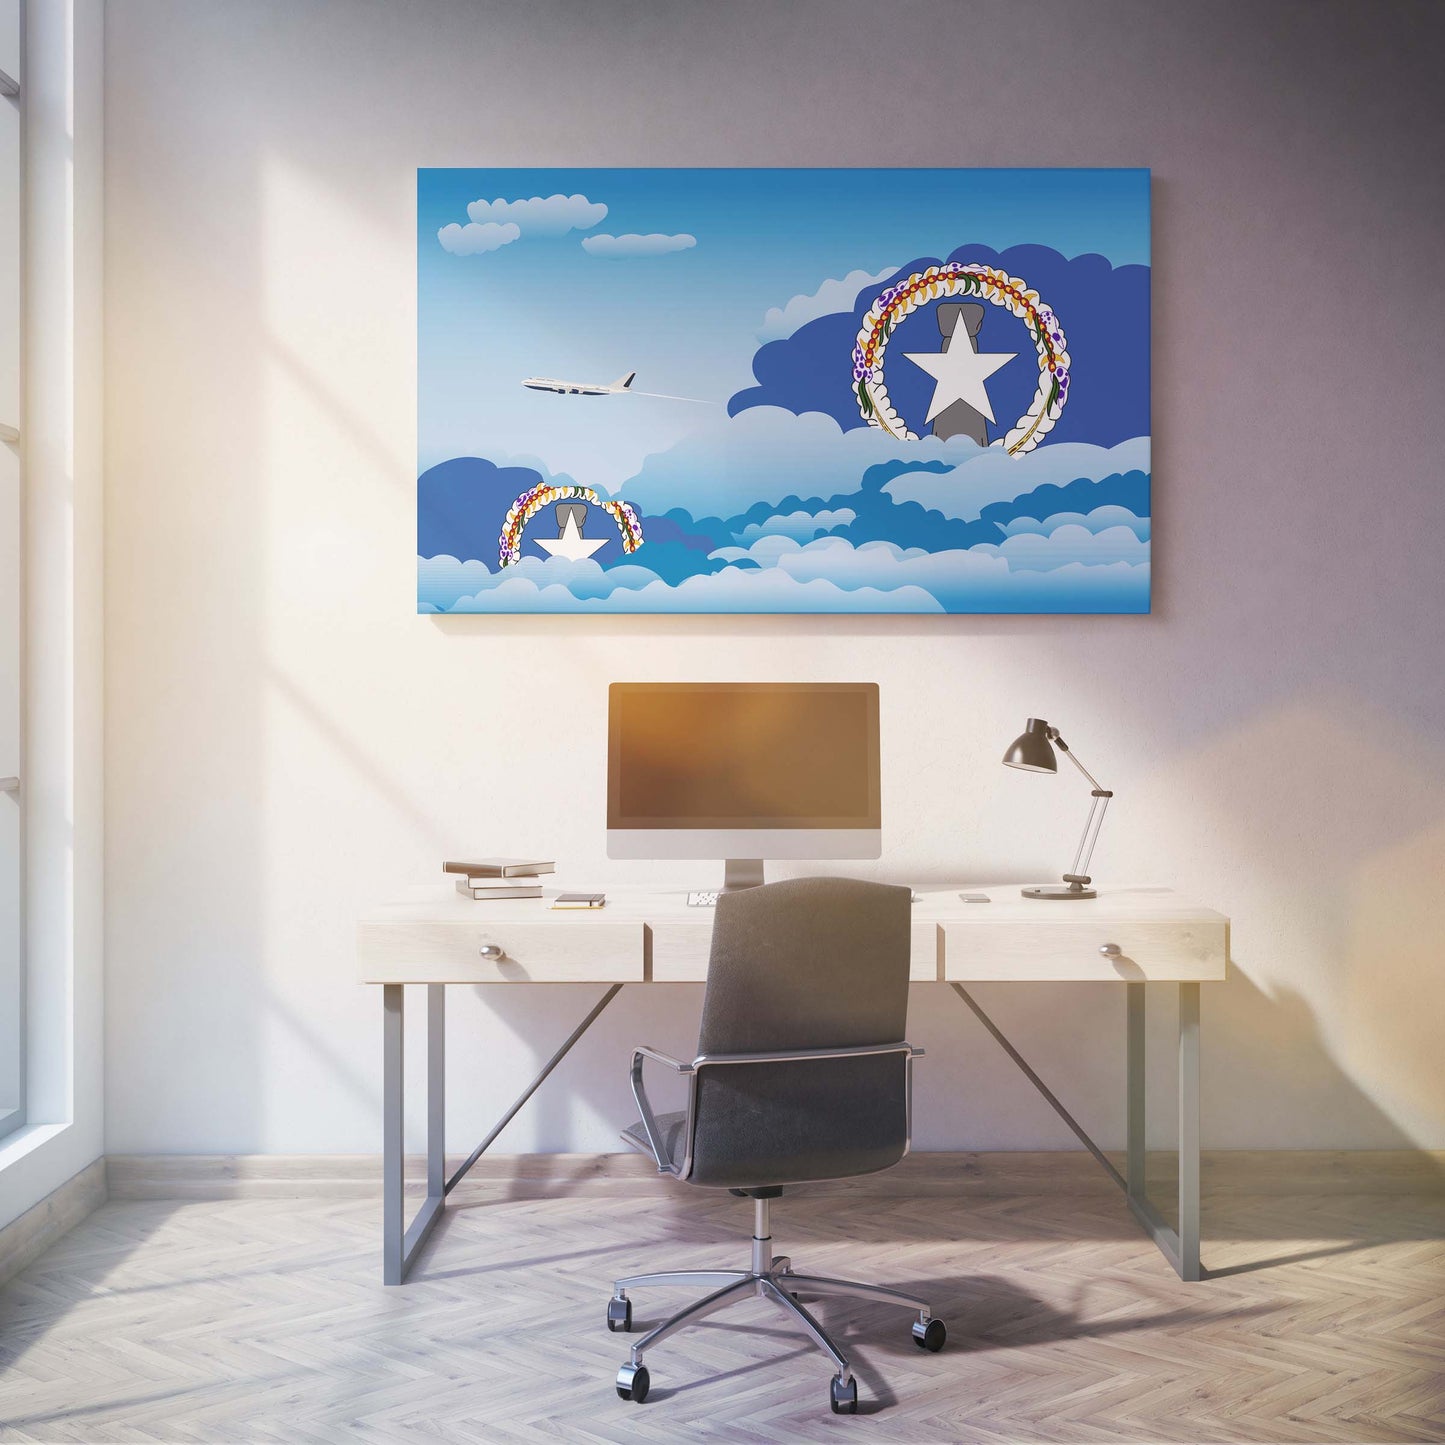 Northern Mariana Islands Flags Day Clouds Canvas Print Framed